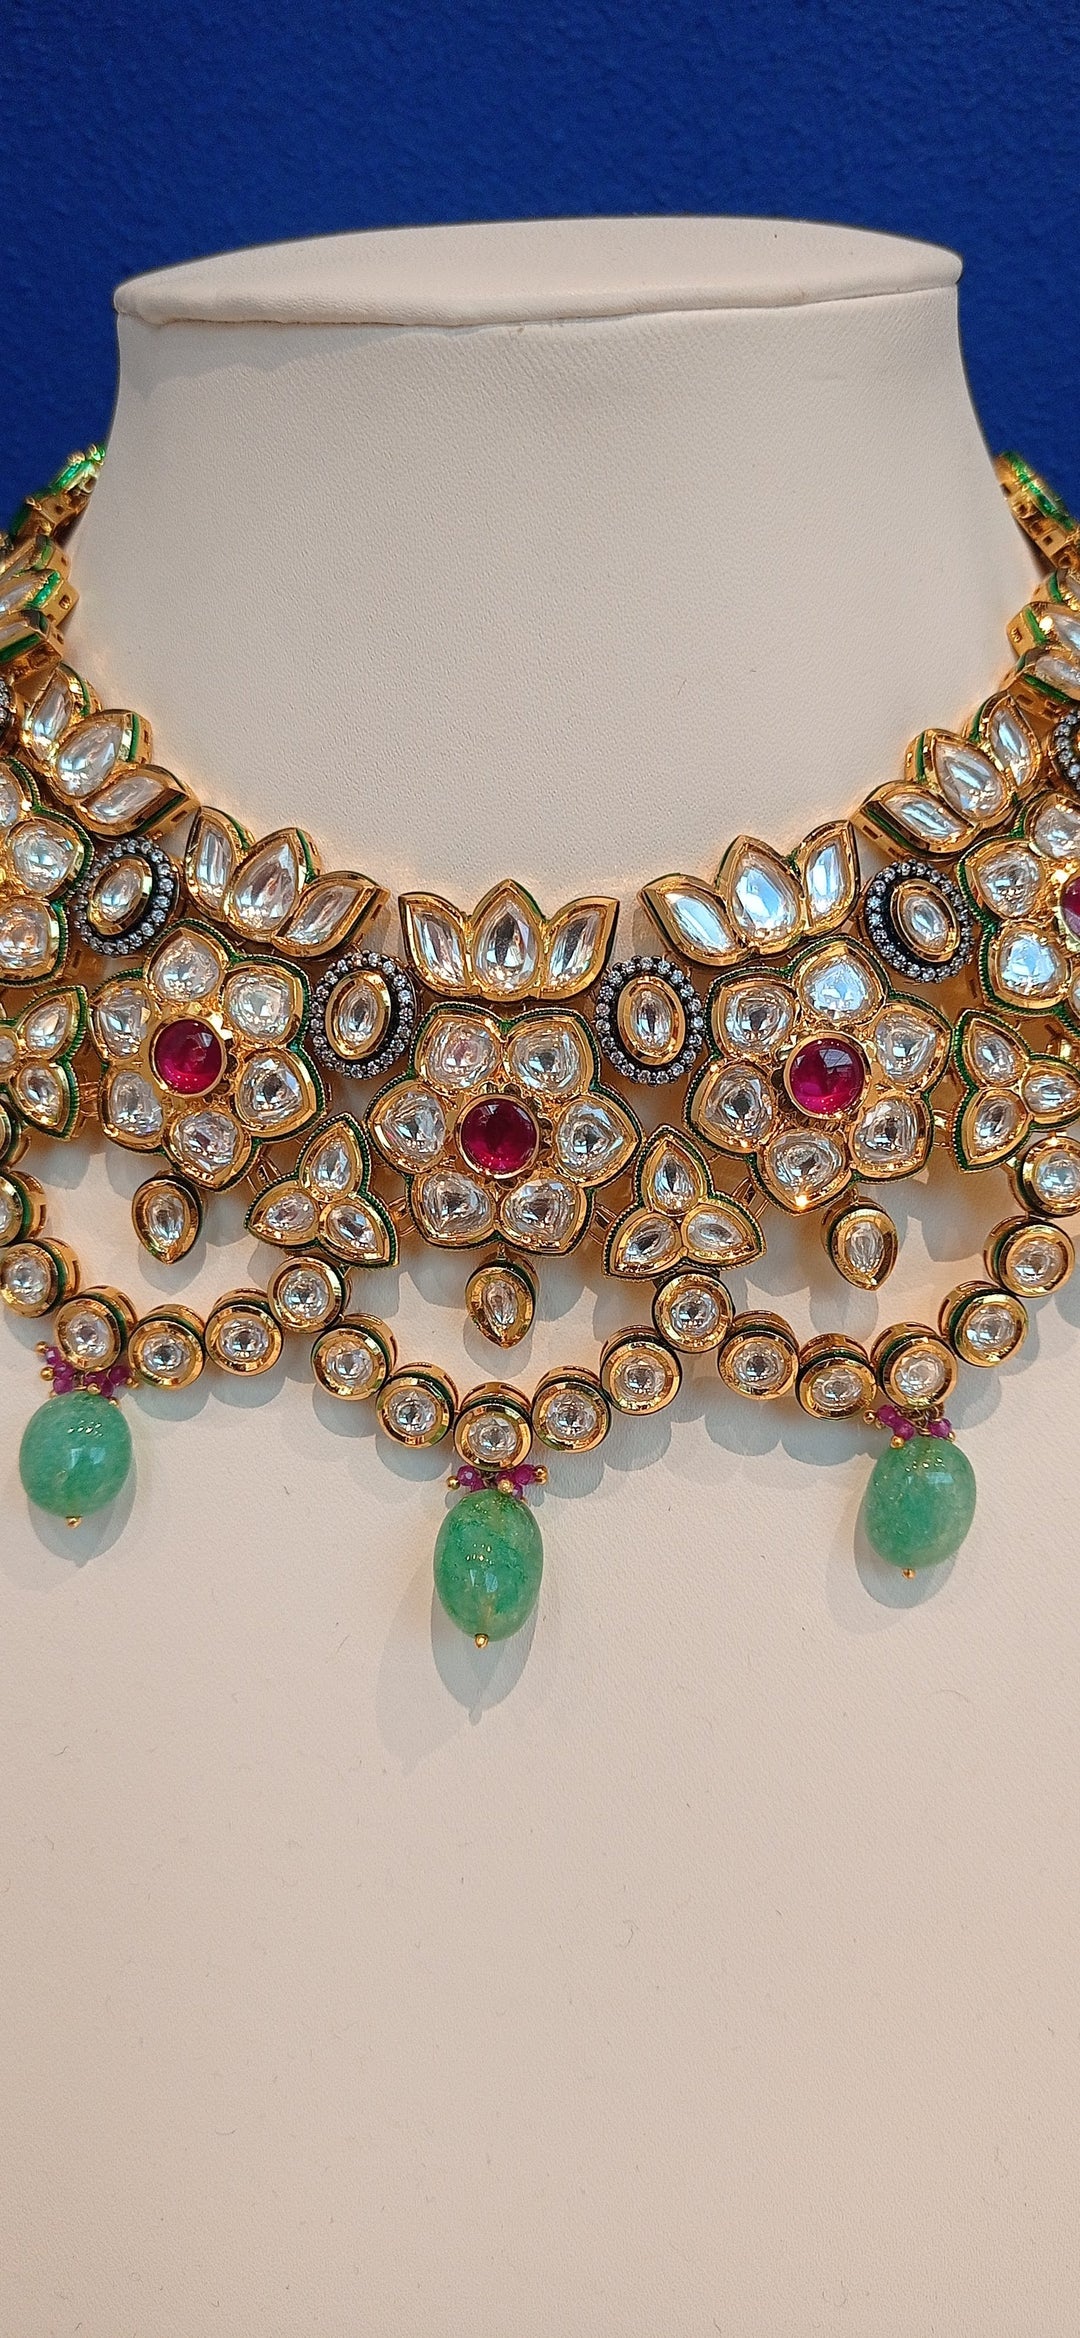 Syrah Kundan Floral Ruby and Emerald Beaded Necklace and Earrings Indian Wedding Set